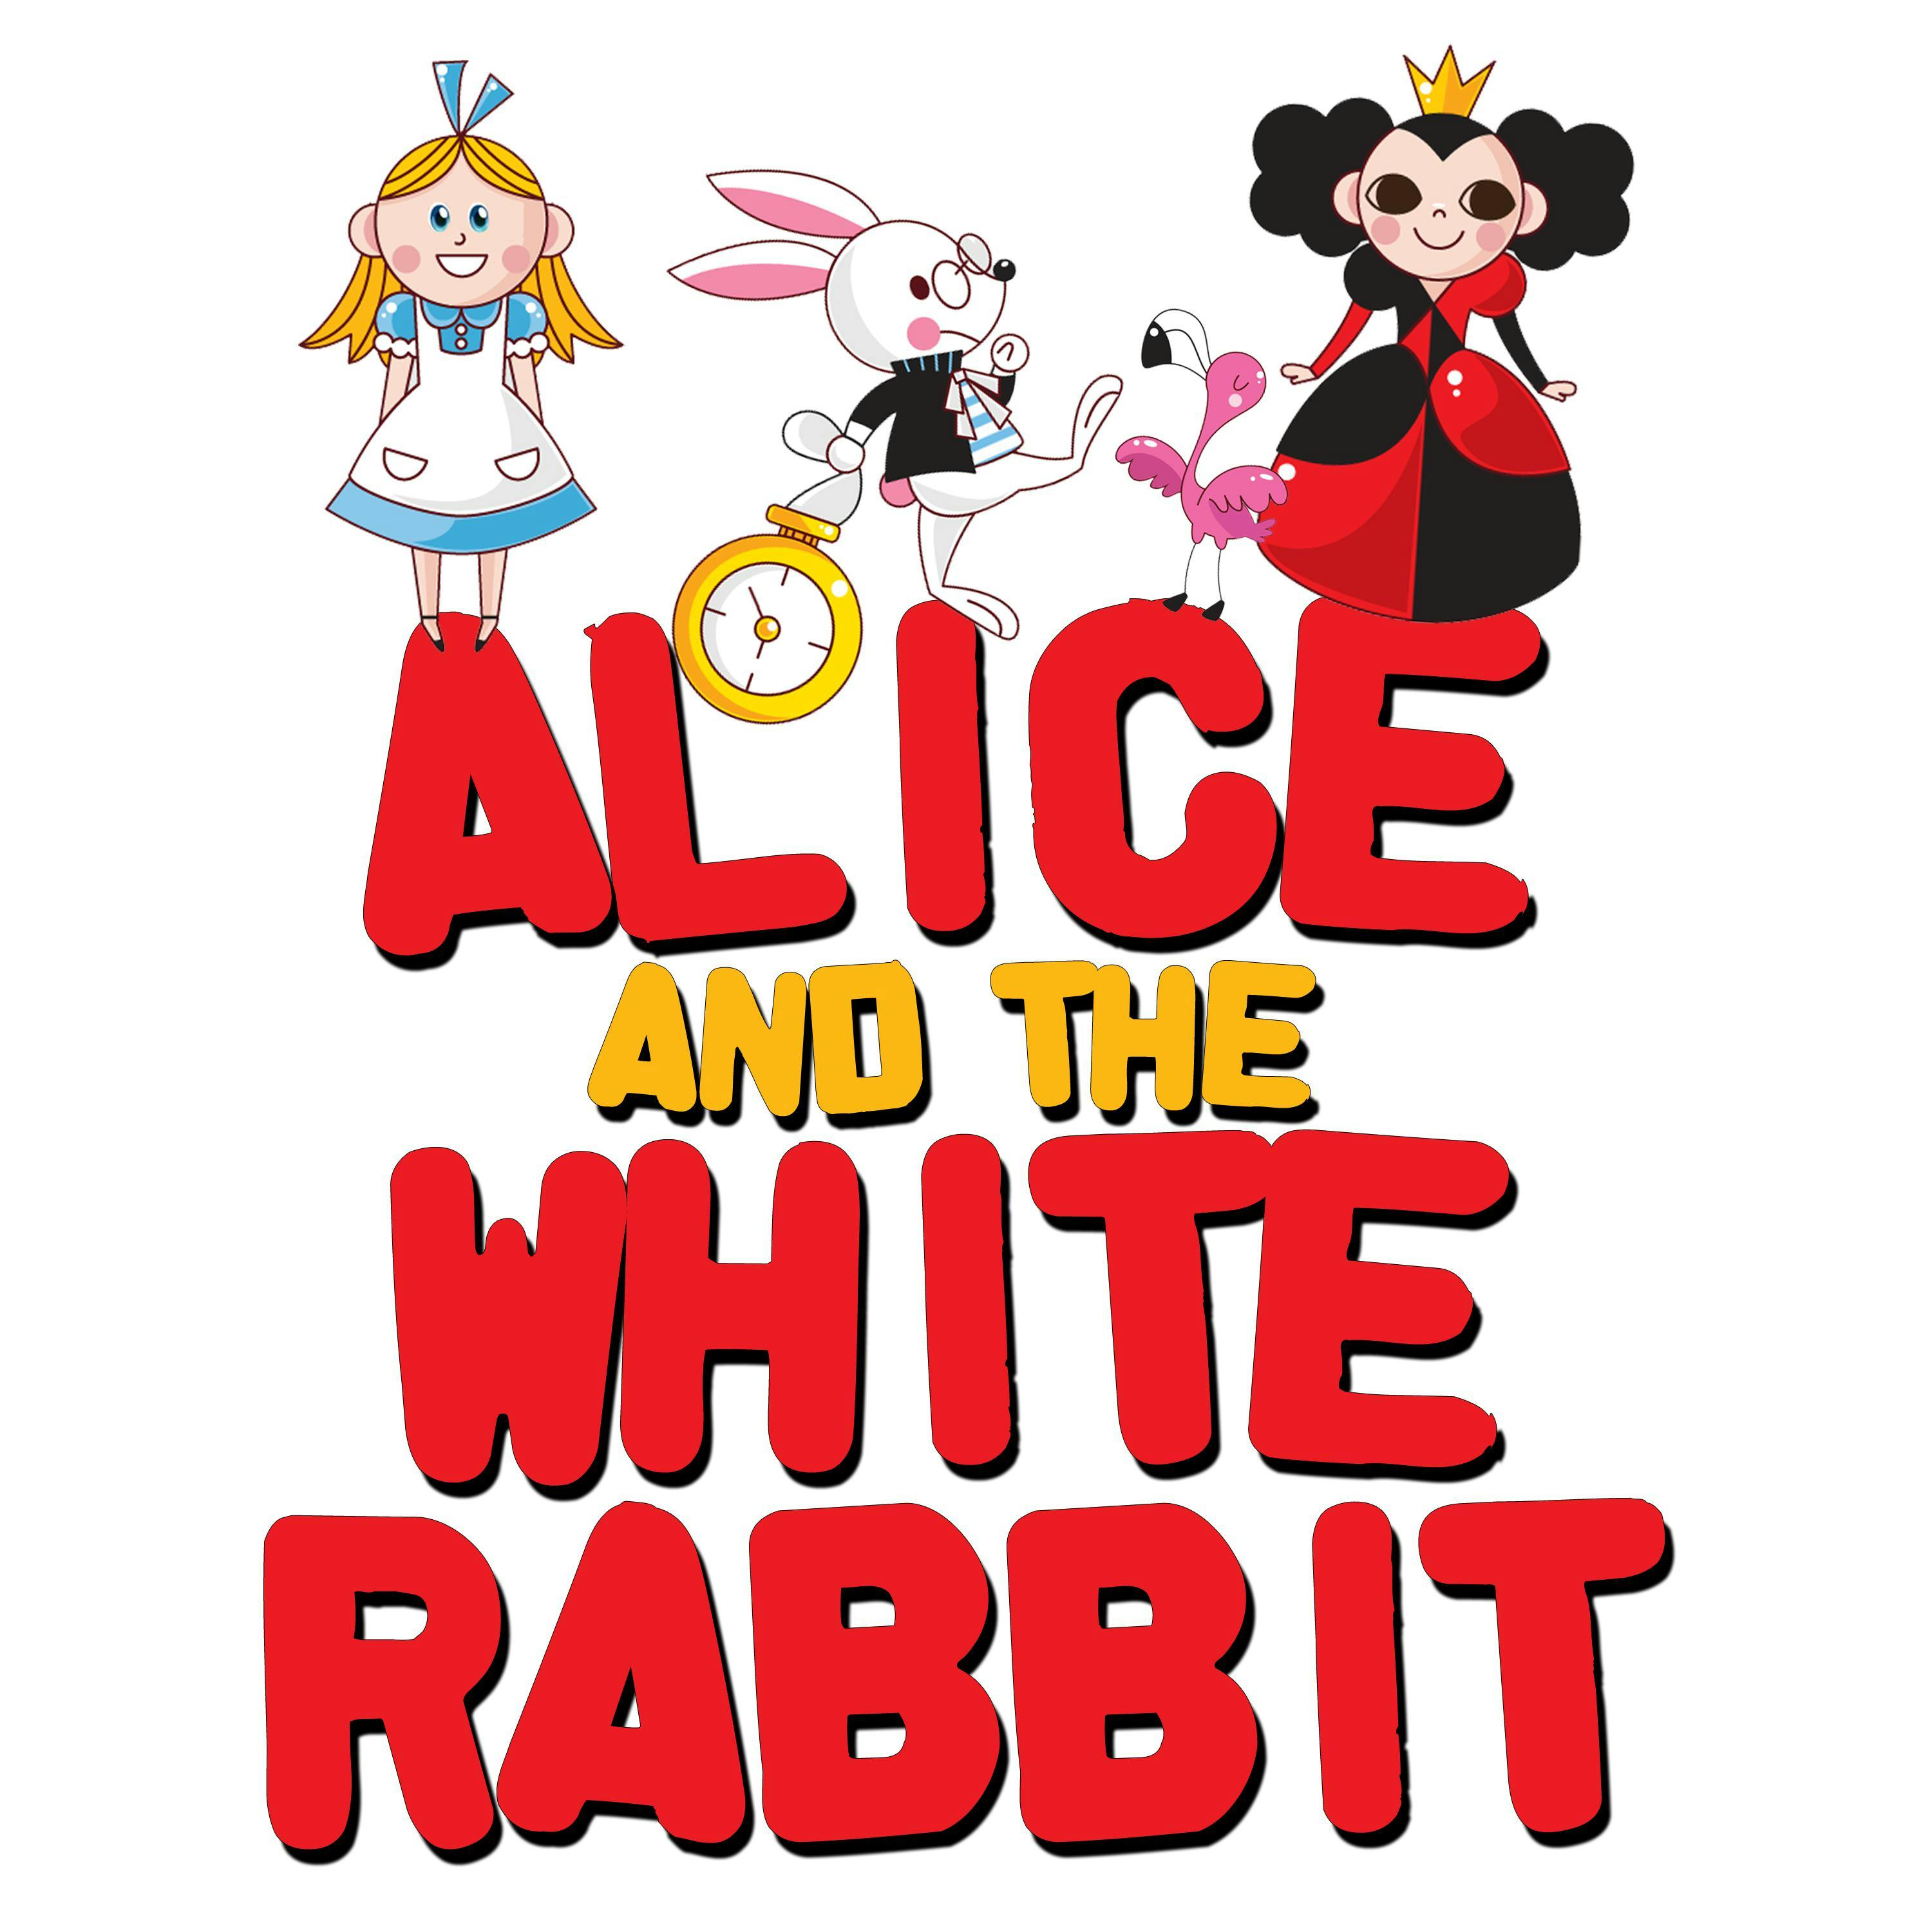 Alice and the White Rabbit - undefined